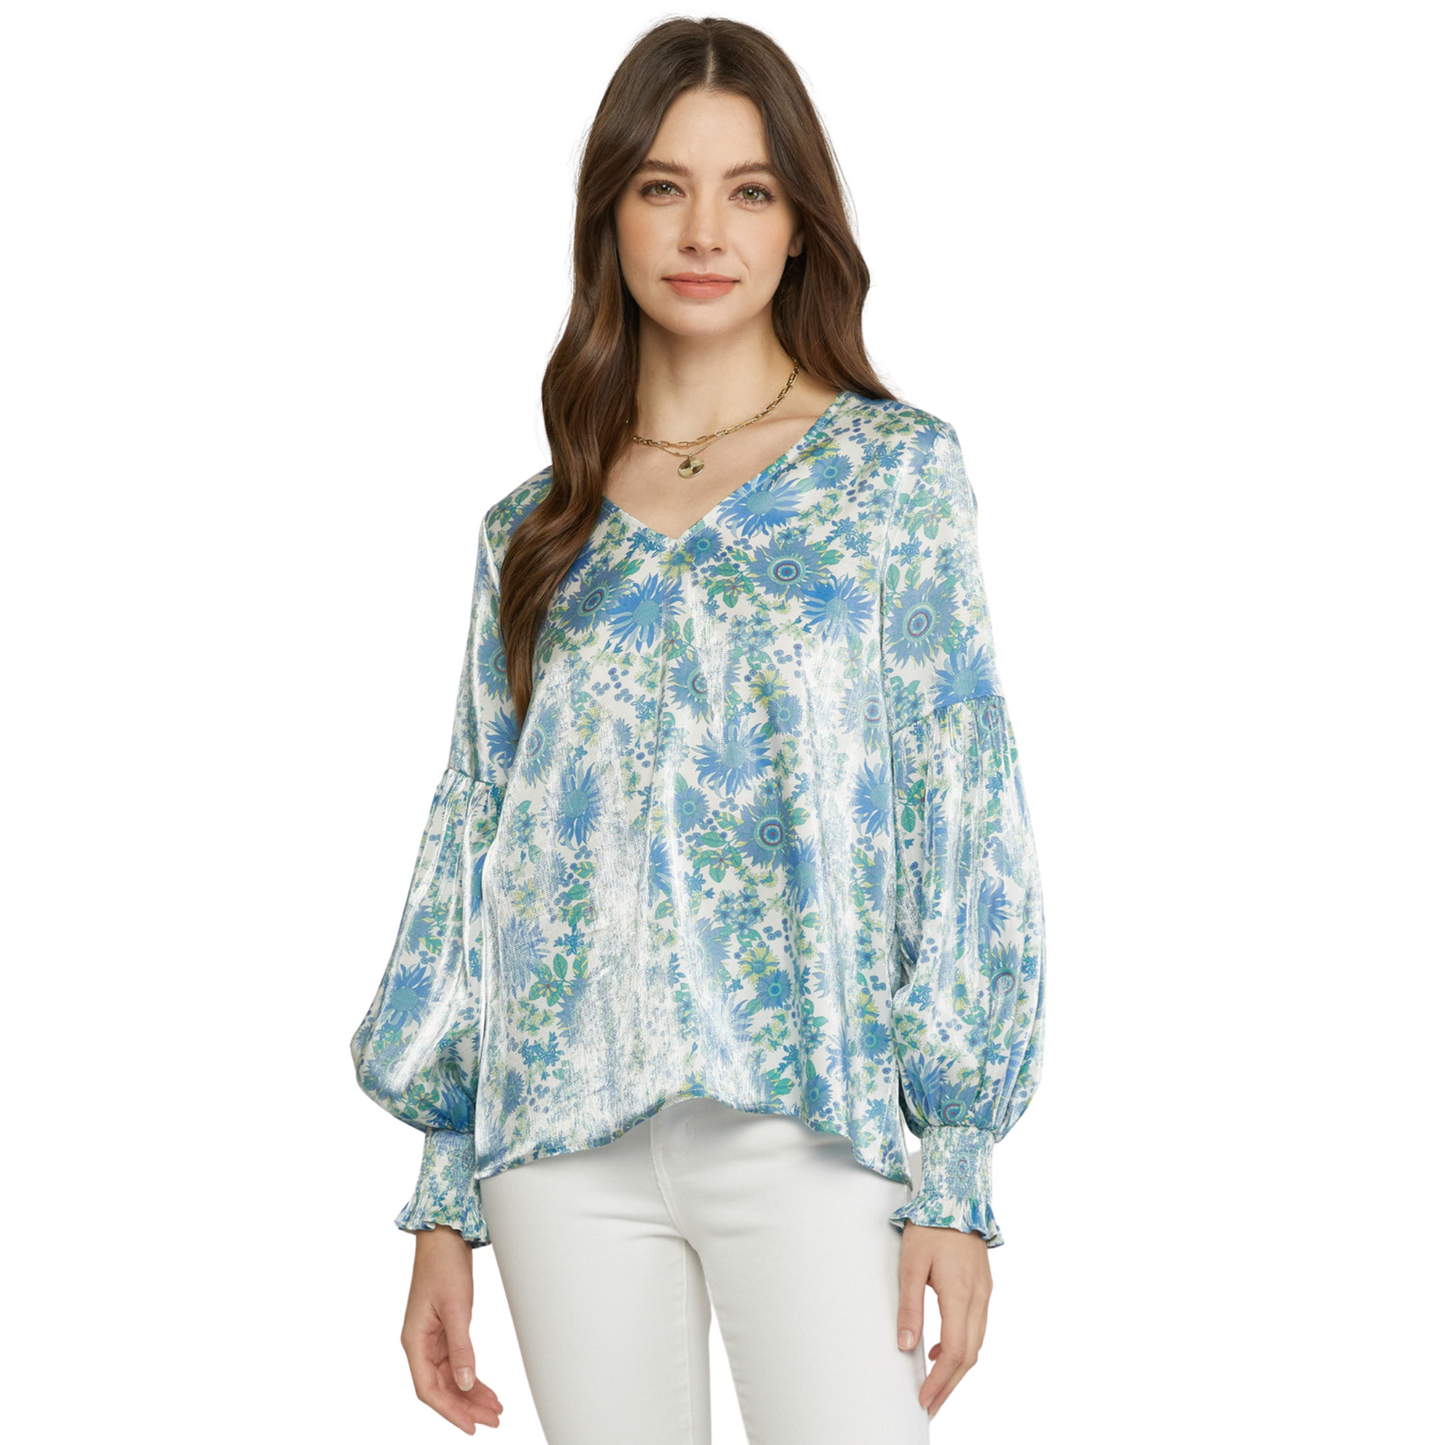 This Floral Print Top is perfect for adding a pop of color to your wardrobe. The silky-smooth fabric is soft and comfortable, while the long sleeve design and loose fit provide an easy, relaxed look. Create effortless style with this blue top.